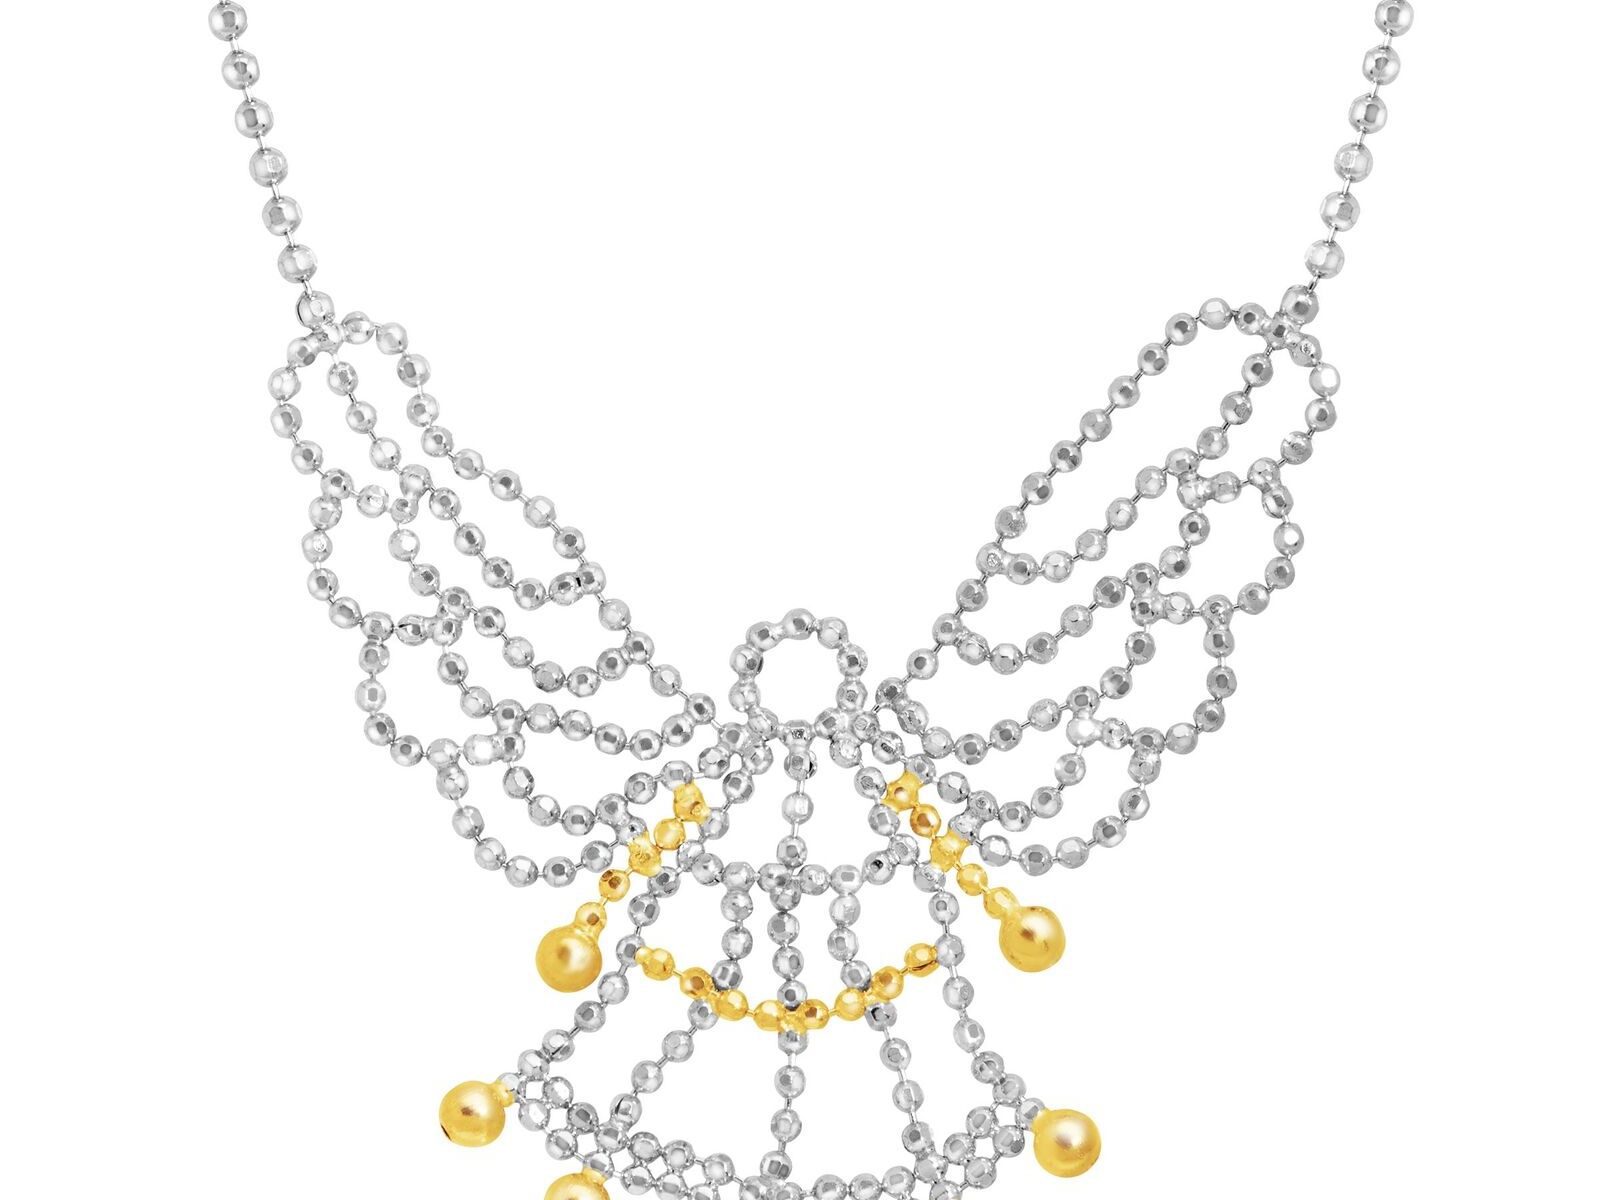 Guardian Angel Beaded Necklace in Sterling Silver & 10K Gold